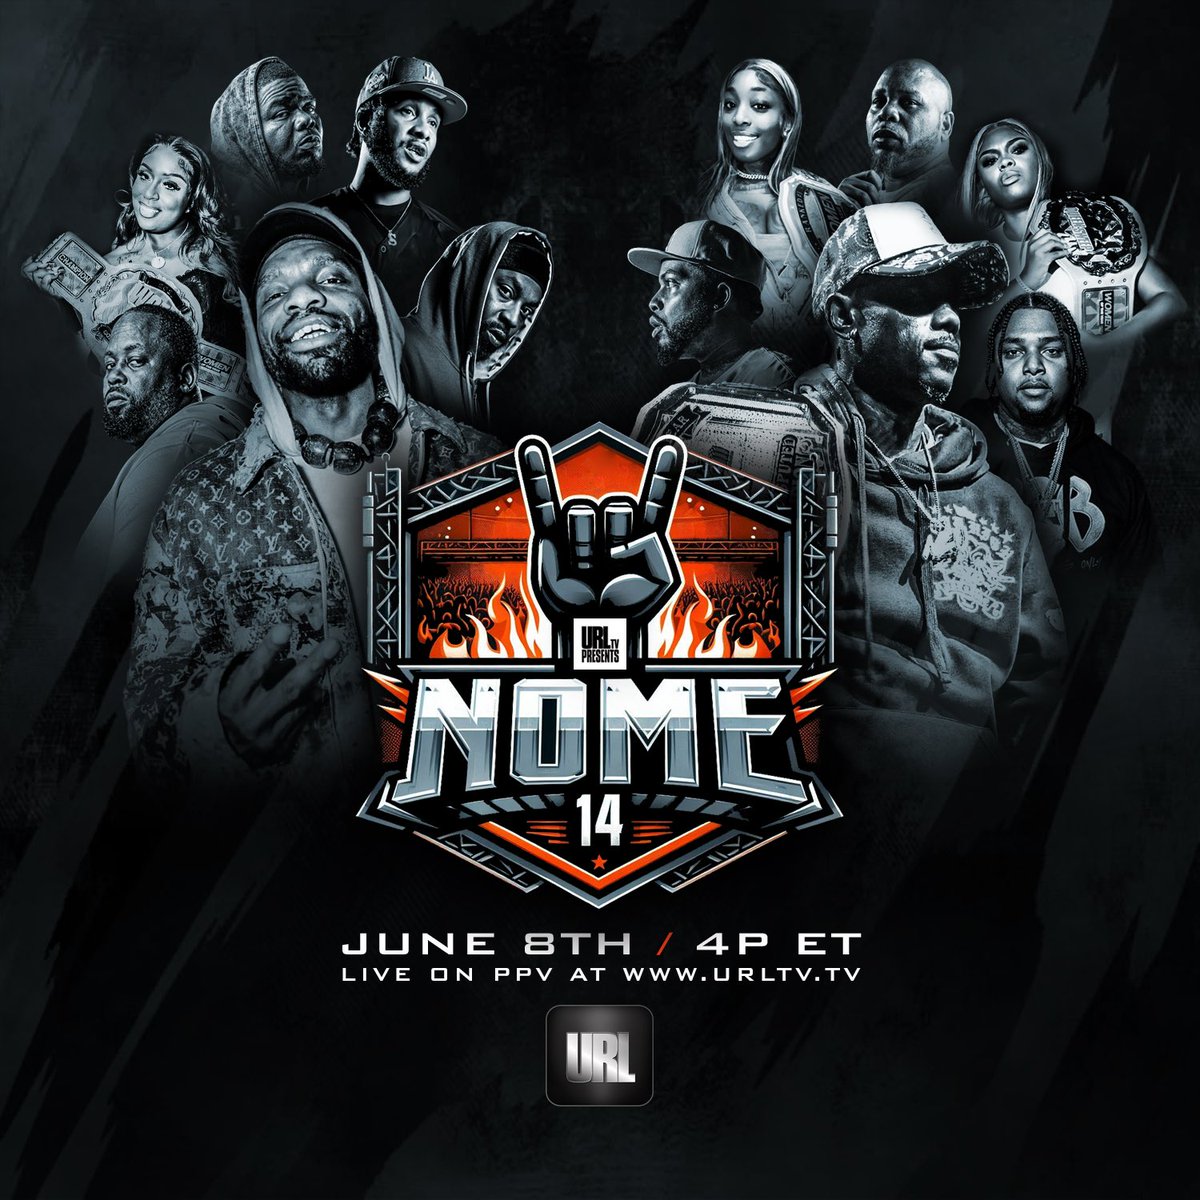 Which battle will be battle of the night? NOME14| June 8th| 4pm| PPV @ urltv.tv